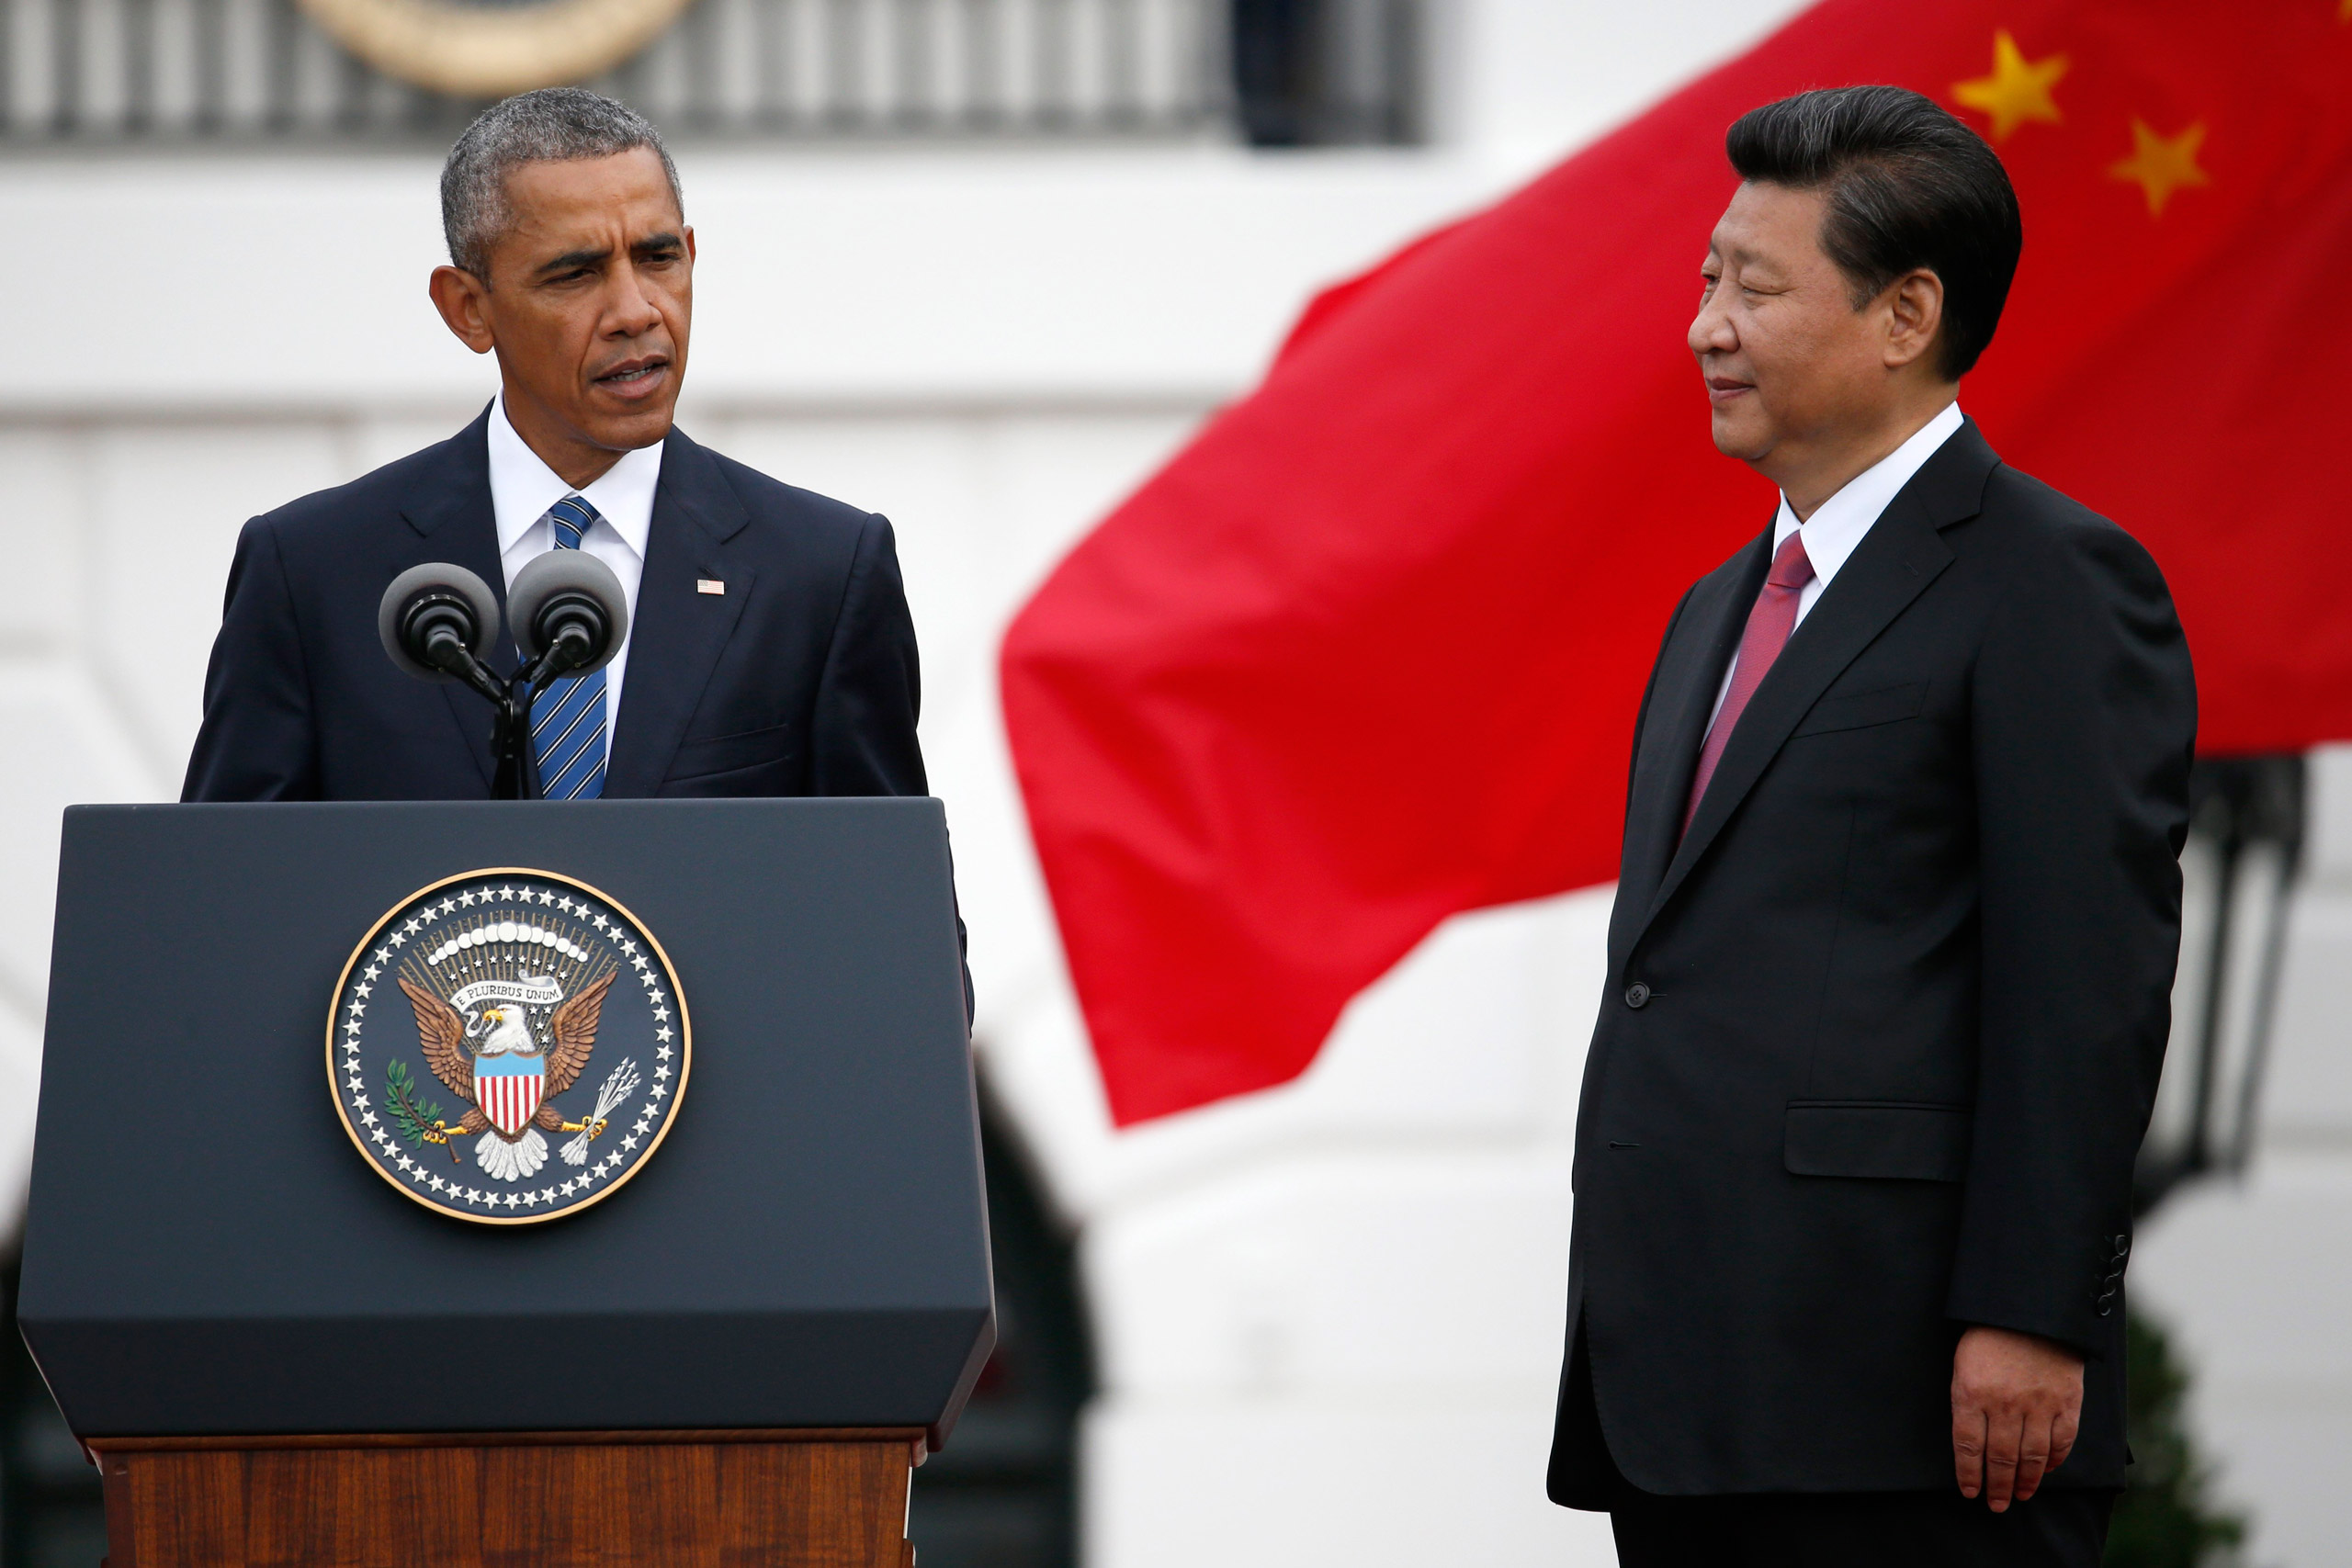 Chinese President Xi Jinping listens as President Barack Obama speaks during an official state arrival ceremony for the Chinese president, Friday, Sept. 25, 2015, on the South Lawn of the White House in Washington. (AP Photo/Evan Vucci)